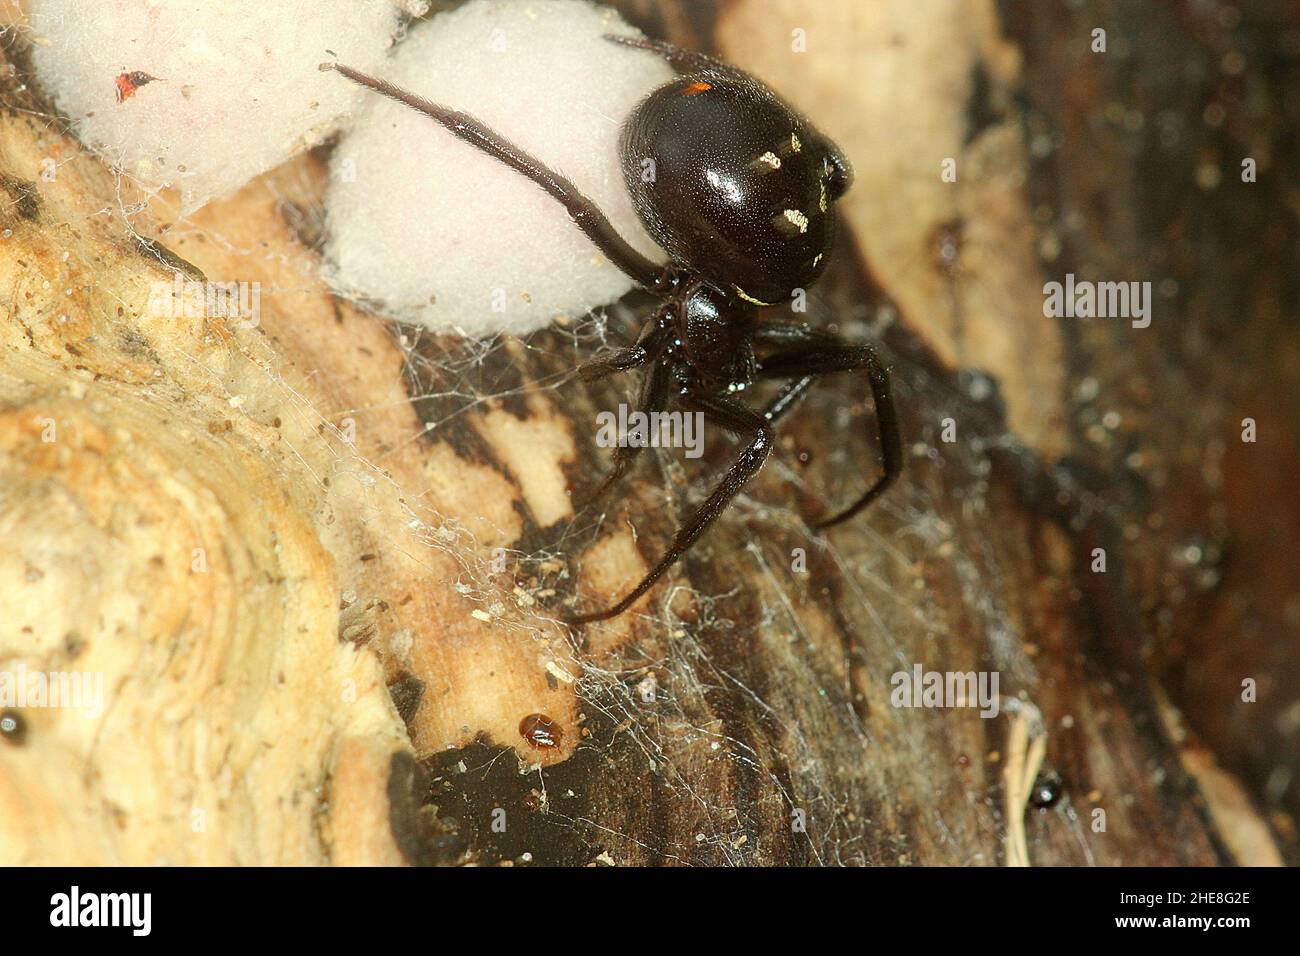 False widow spider (Steatoda capensis) with egg sacs Stock Photo